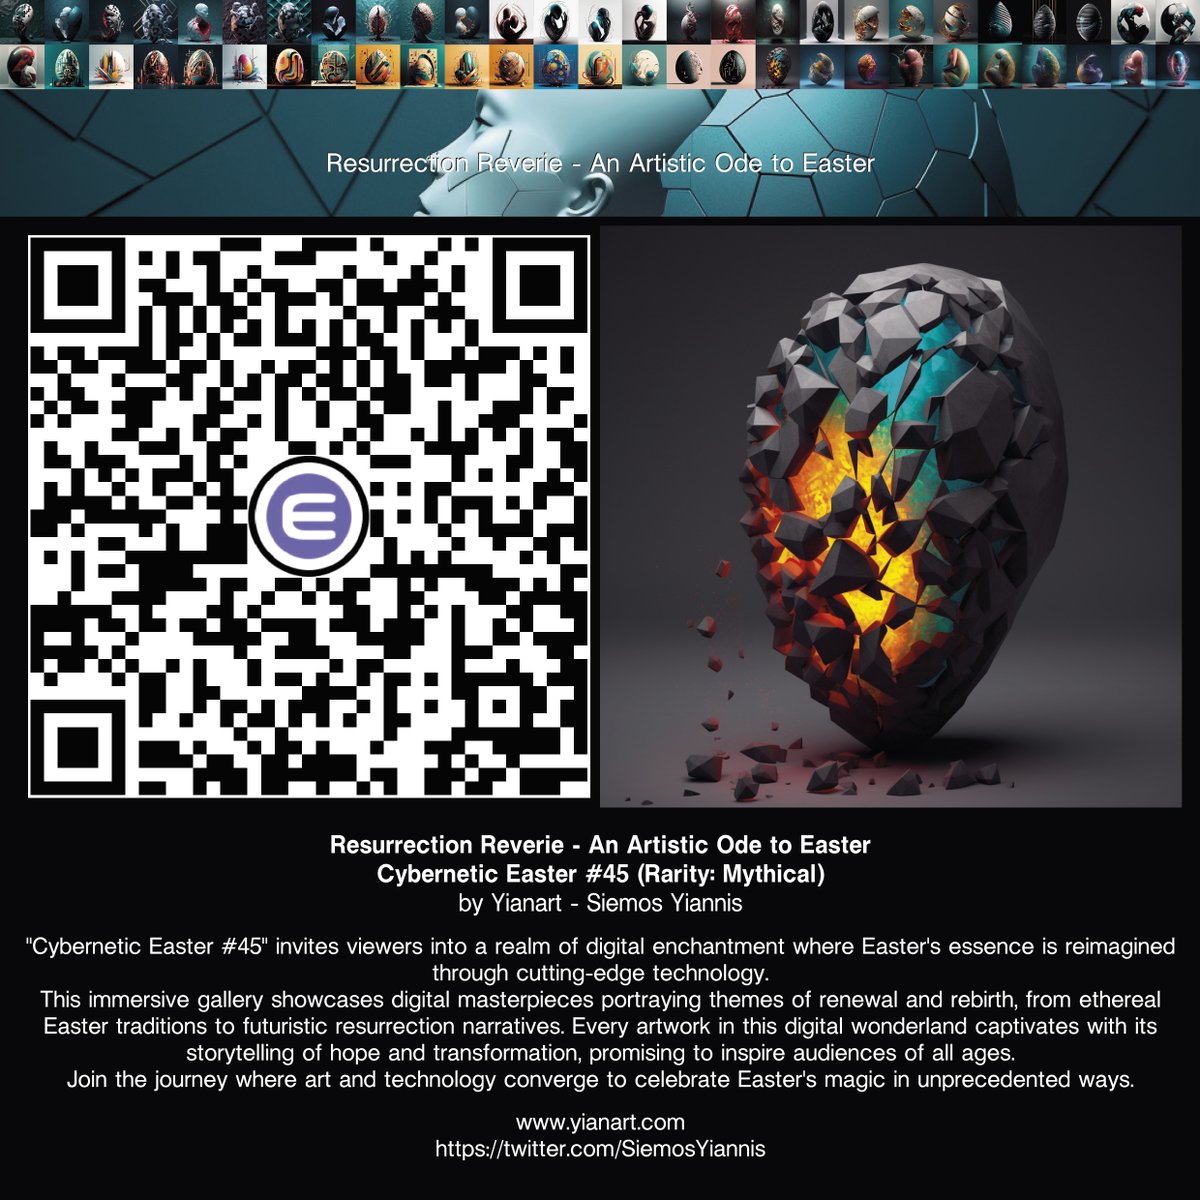 Resurrection Reverie - An Artistic Ode to Easter
Cybernetic Easter #45 (Rarity: Mythical)🥚

Claim Now!
nft.io/beam/claim/5a7…

#nft #nftarts #nftartist #nftartists #nftartwork #nftartcollector #crypto #Cryptocurency #blockchain #digitalart #yianart #enjin #easter #FuelTheEnjin